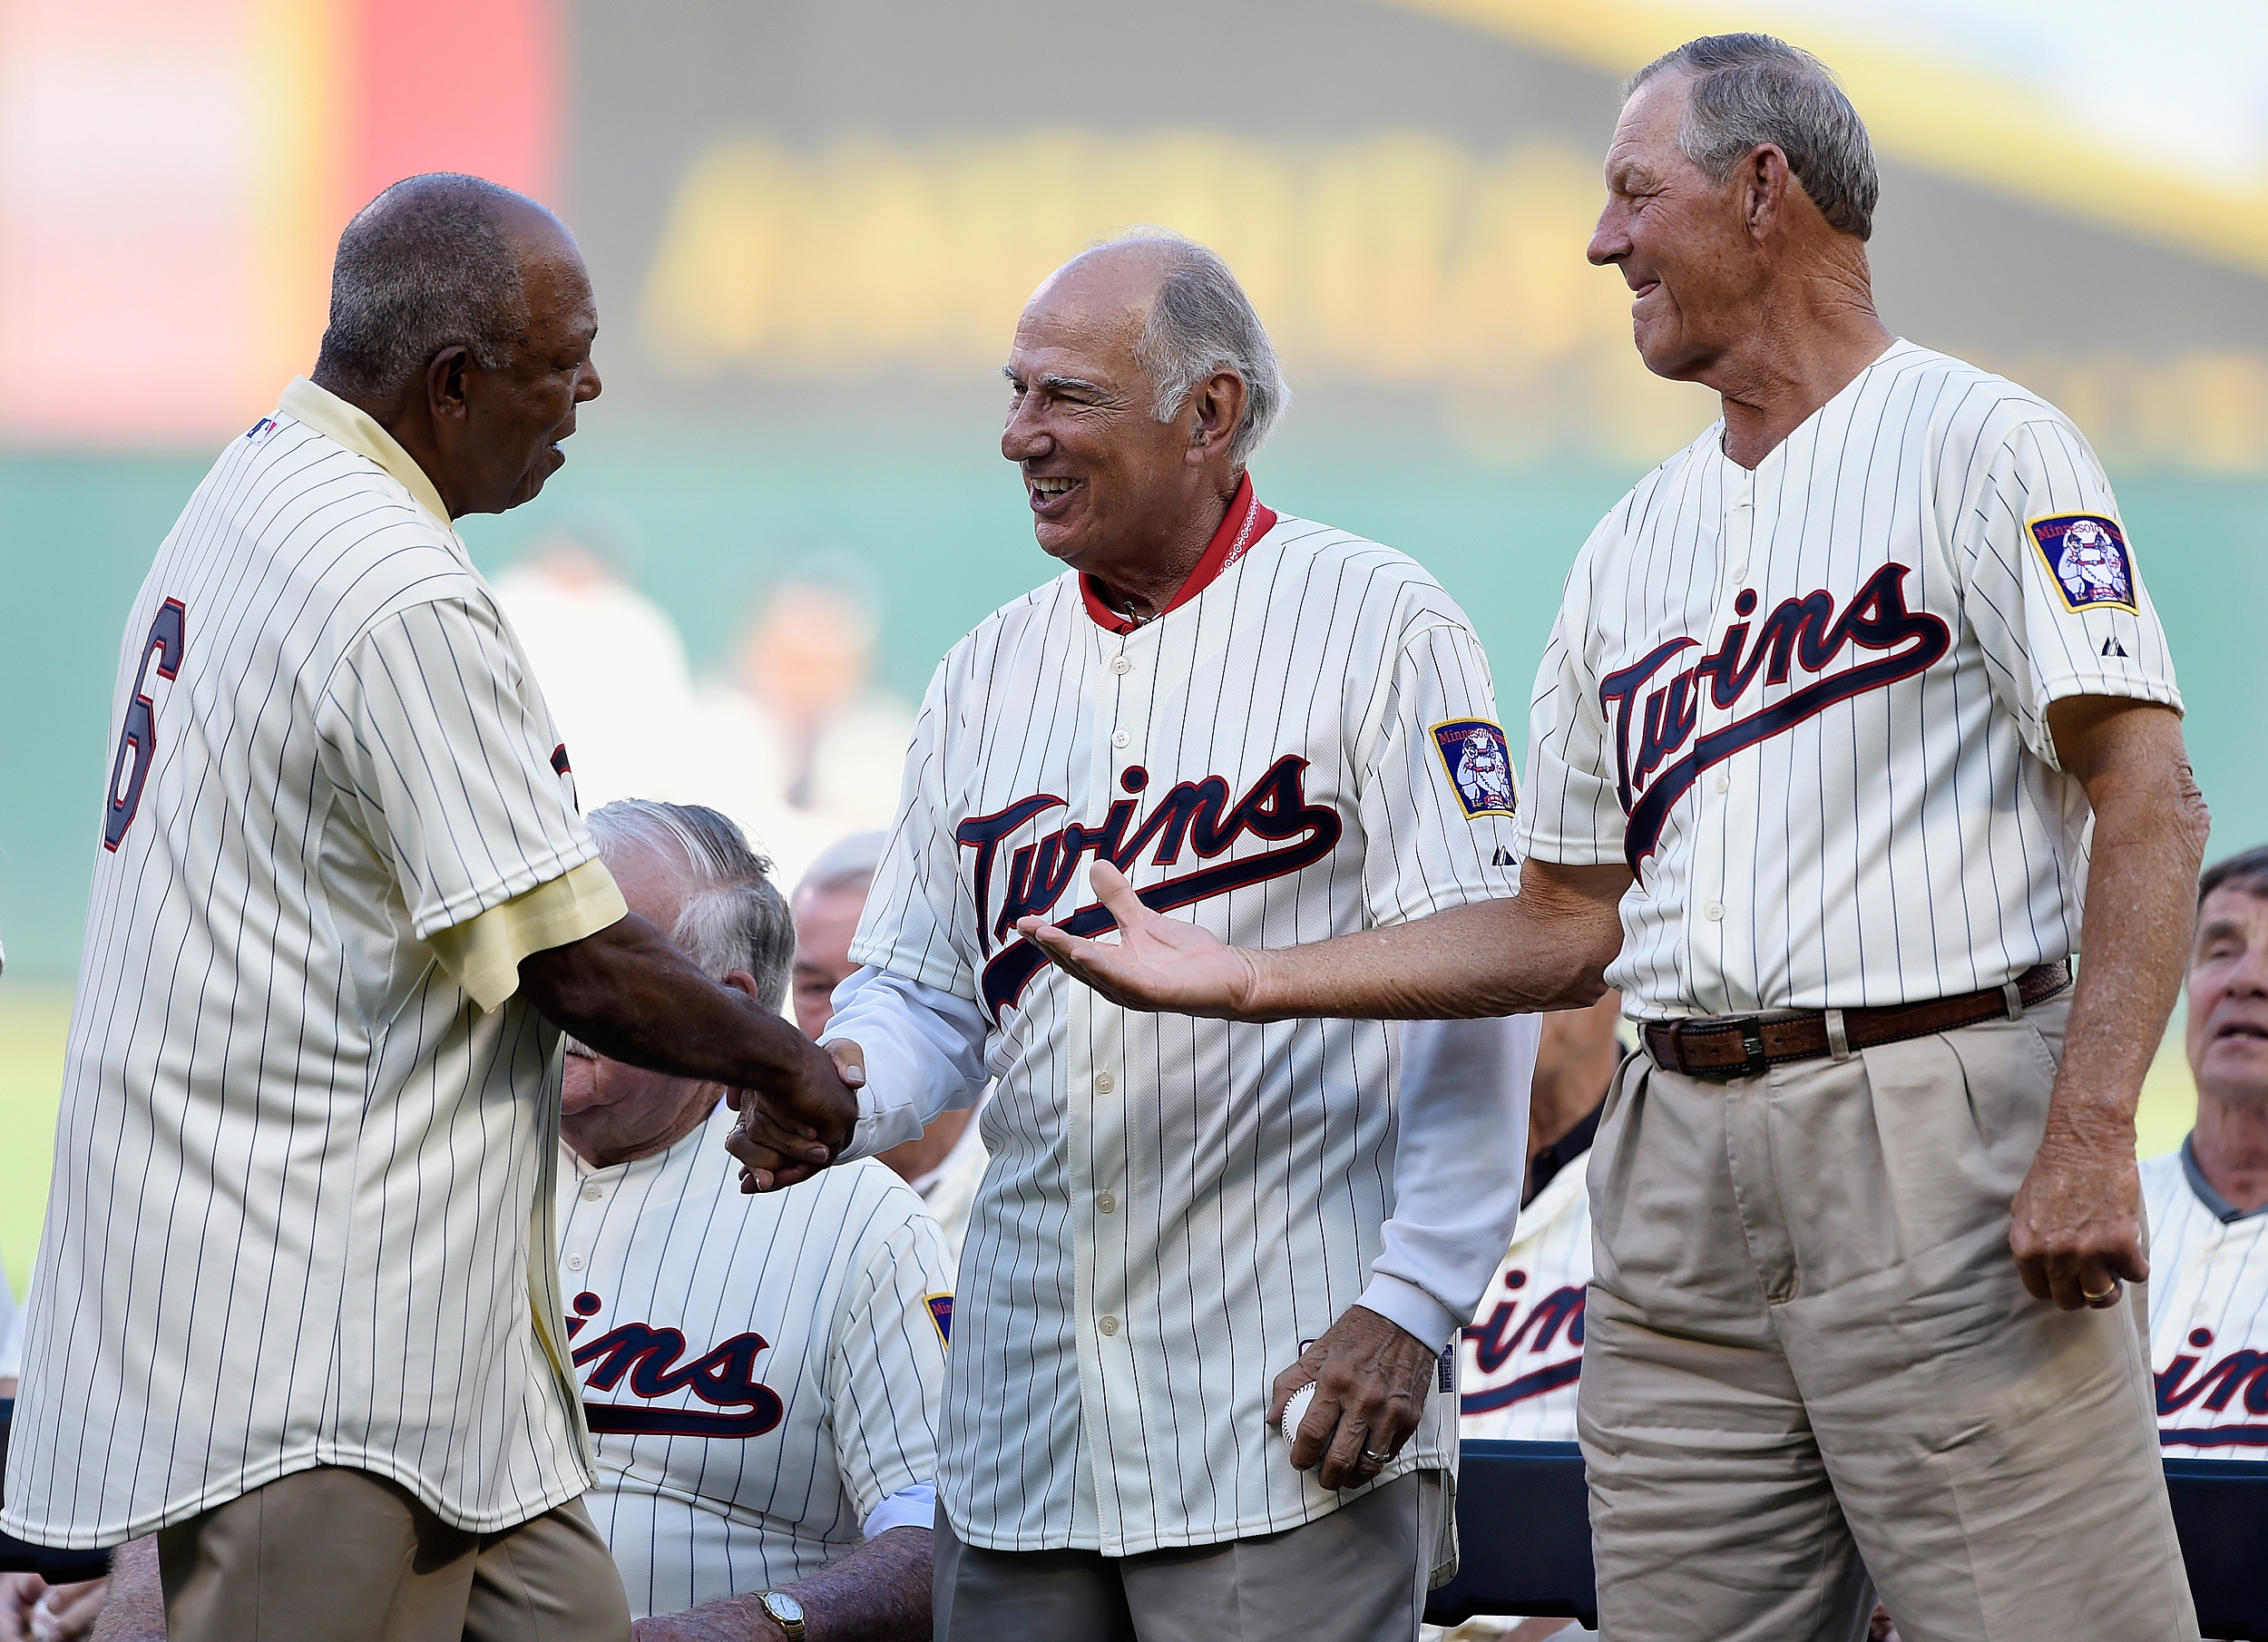 Tony Oliva, who goes into the Hall of Fame this weekend, has a